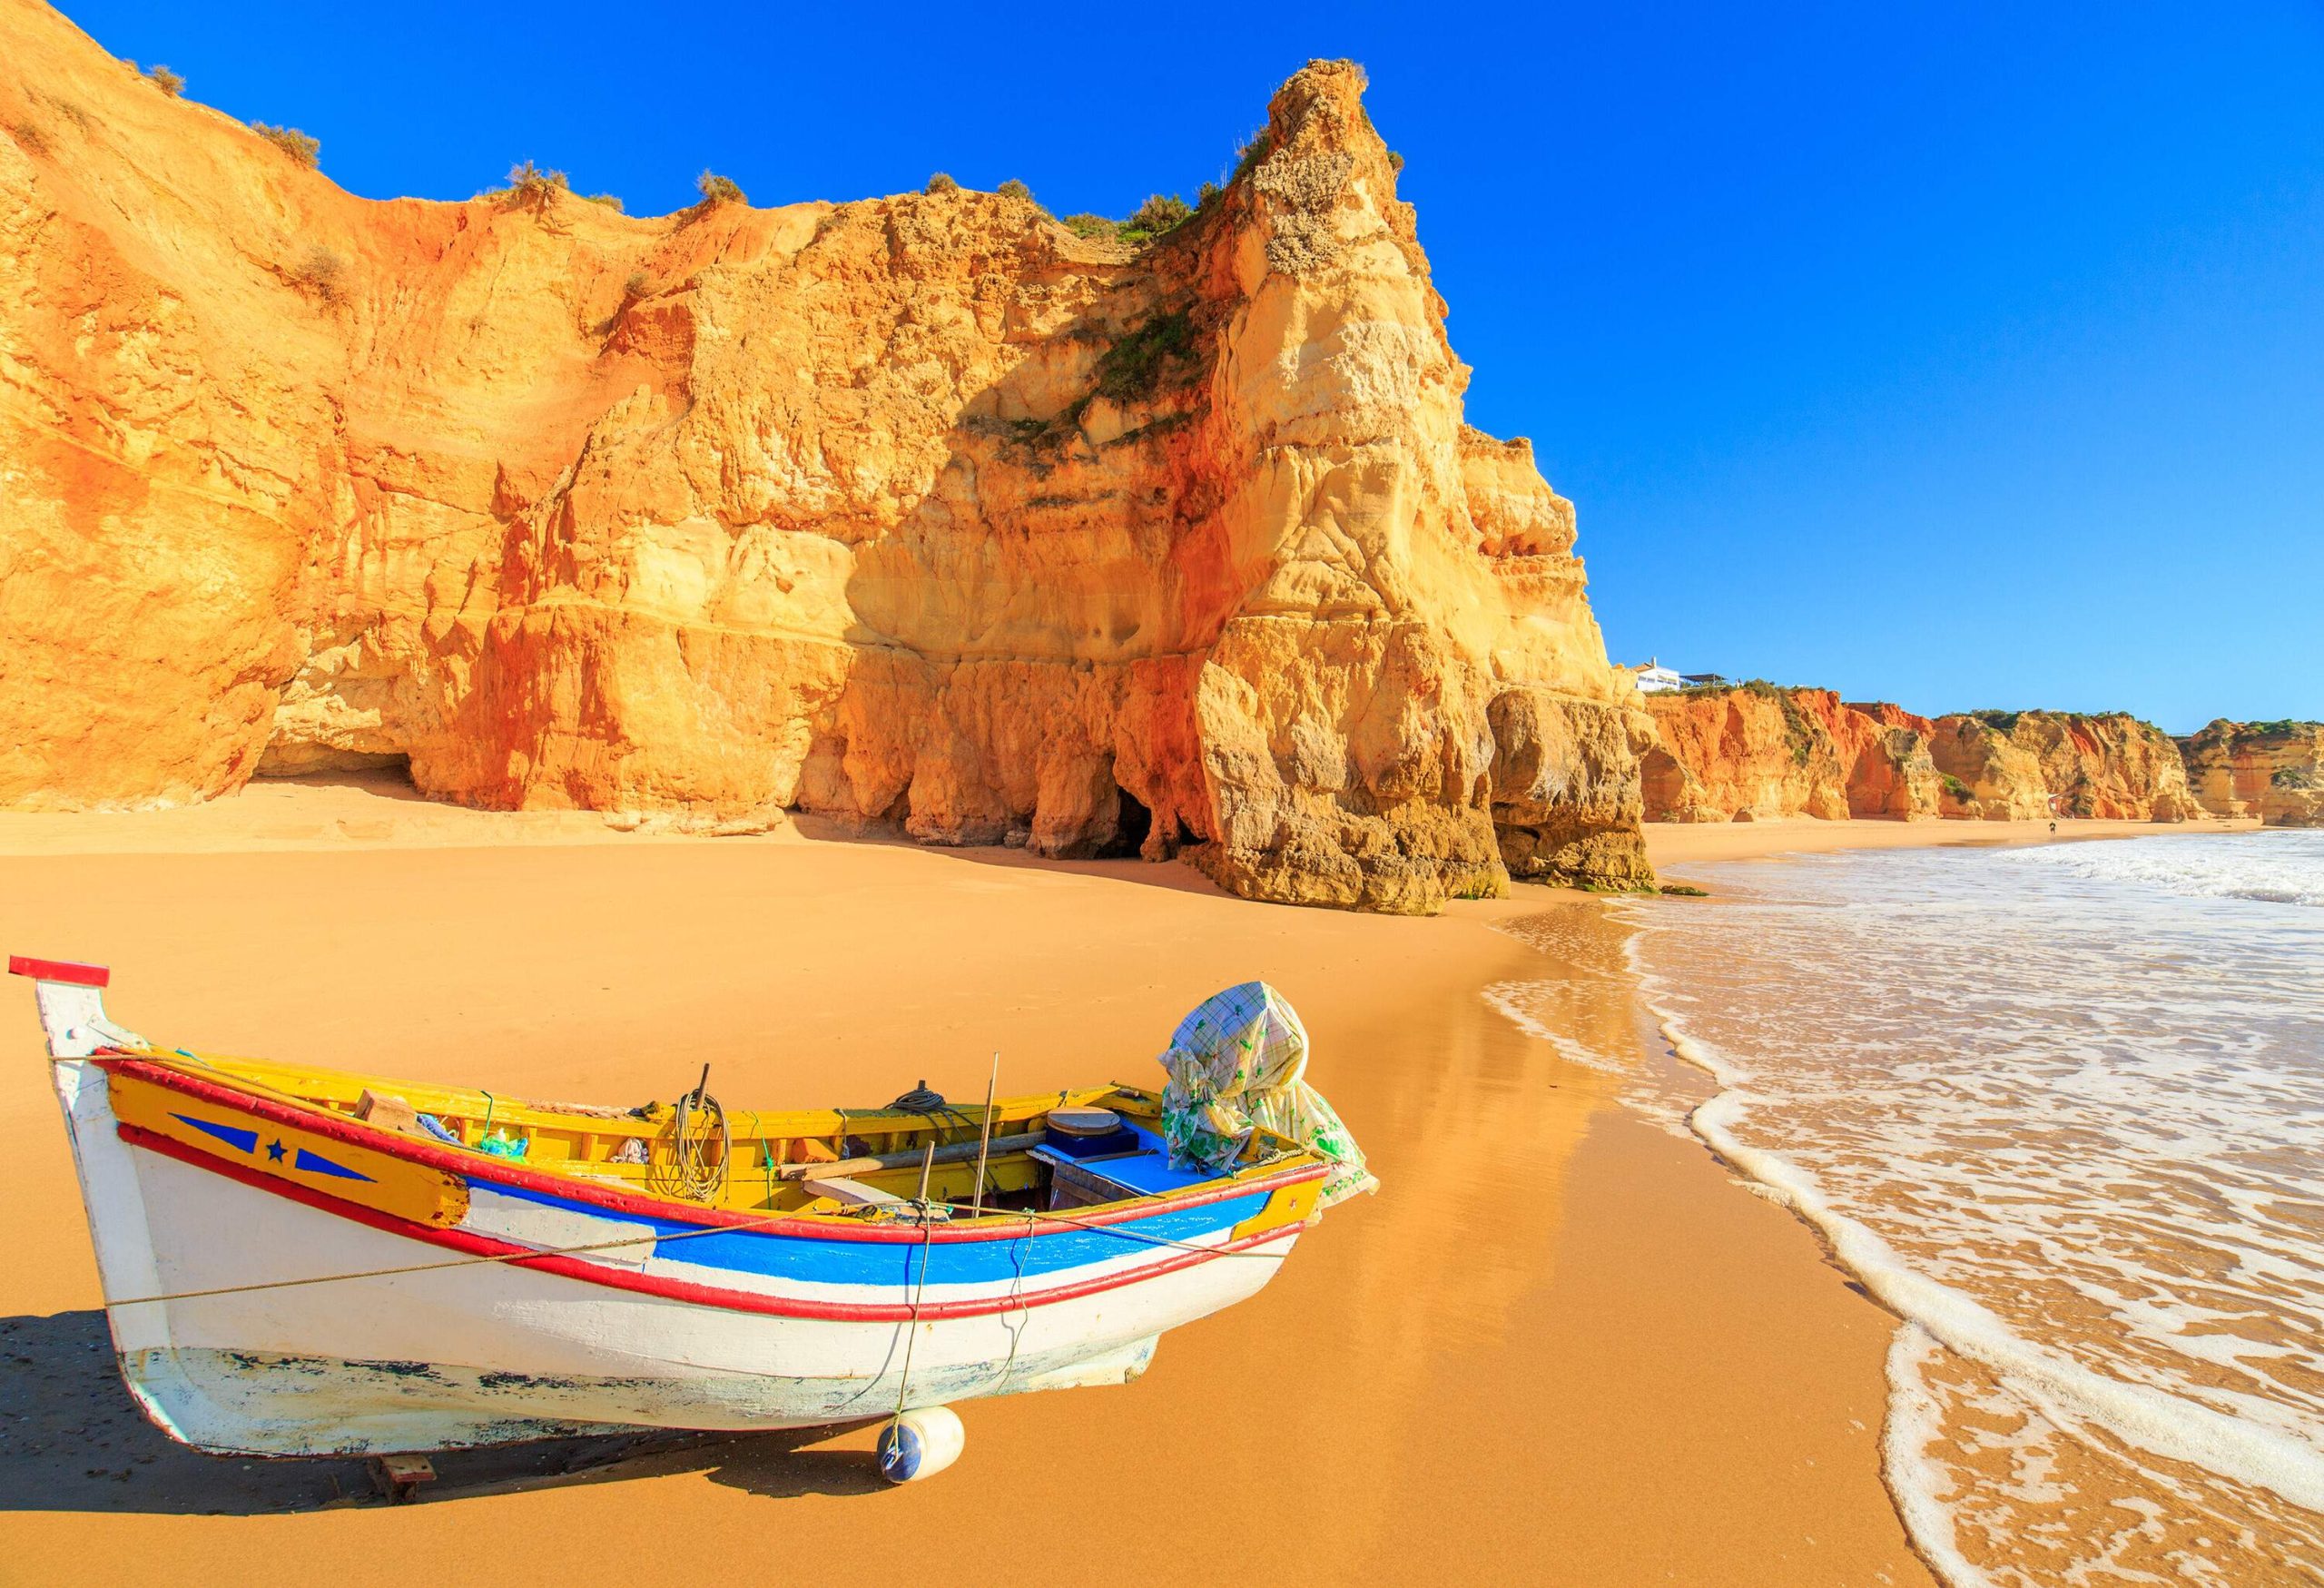 A colourful fishing boat on the shore of a fine sandy beach surrounded by tall rugged cliffs.